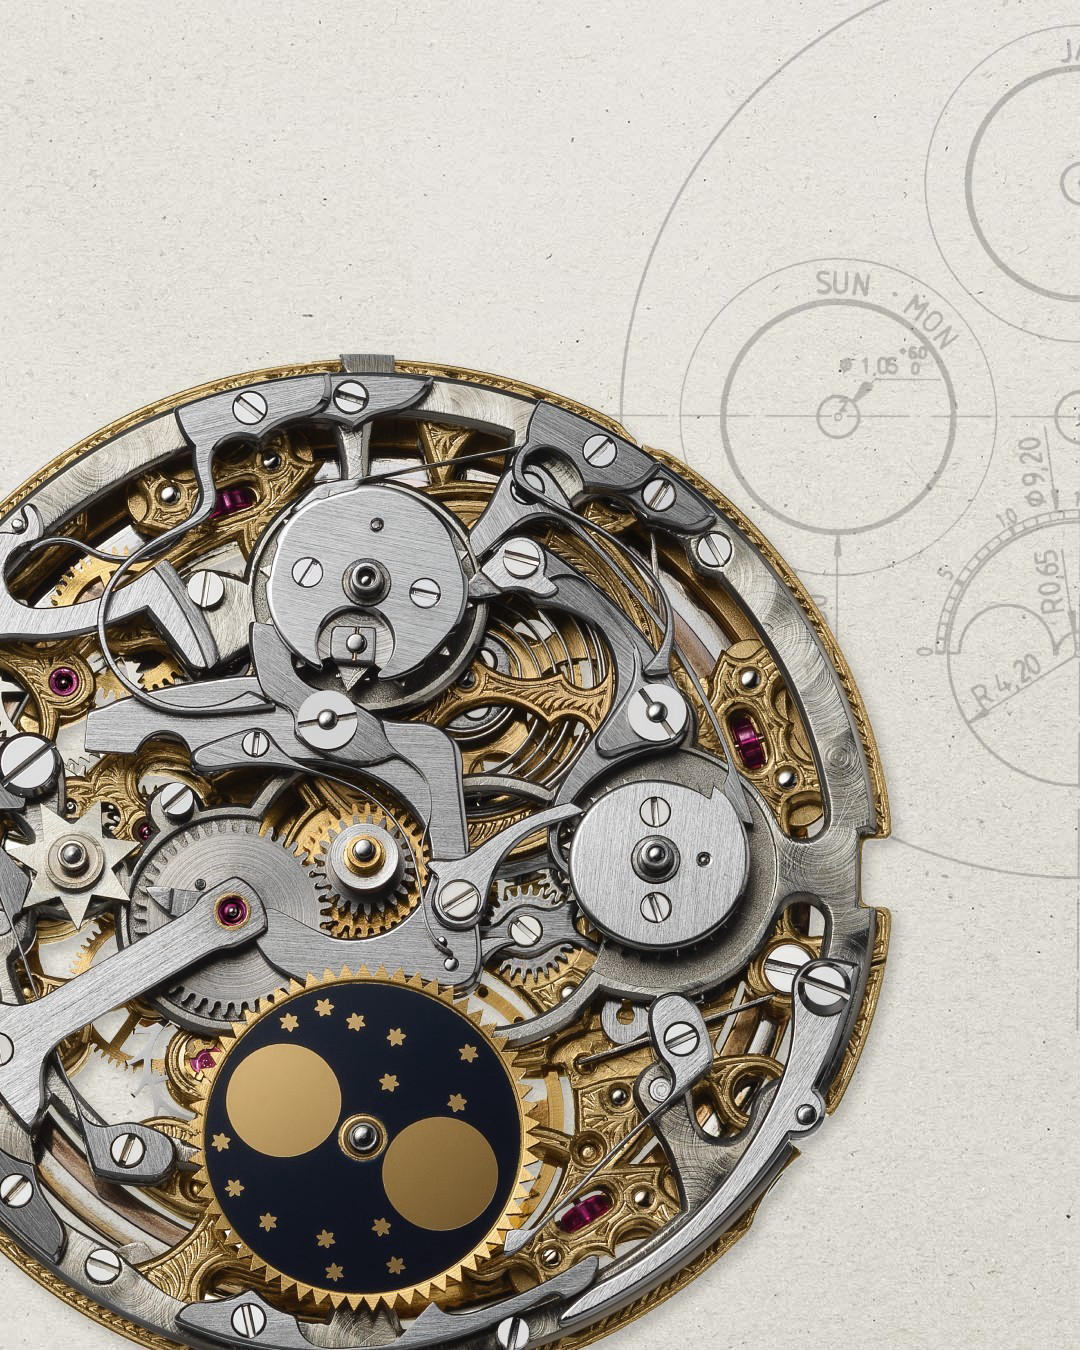 Audemars Piguet - Revealing the marvels of technique and decoration of complicated mechanisms to the